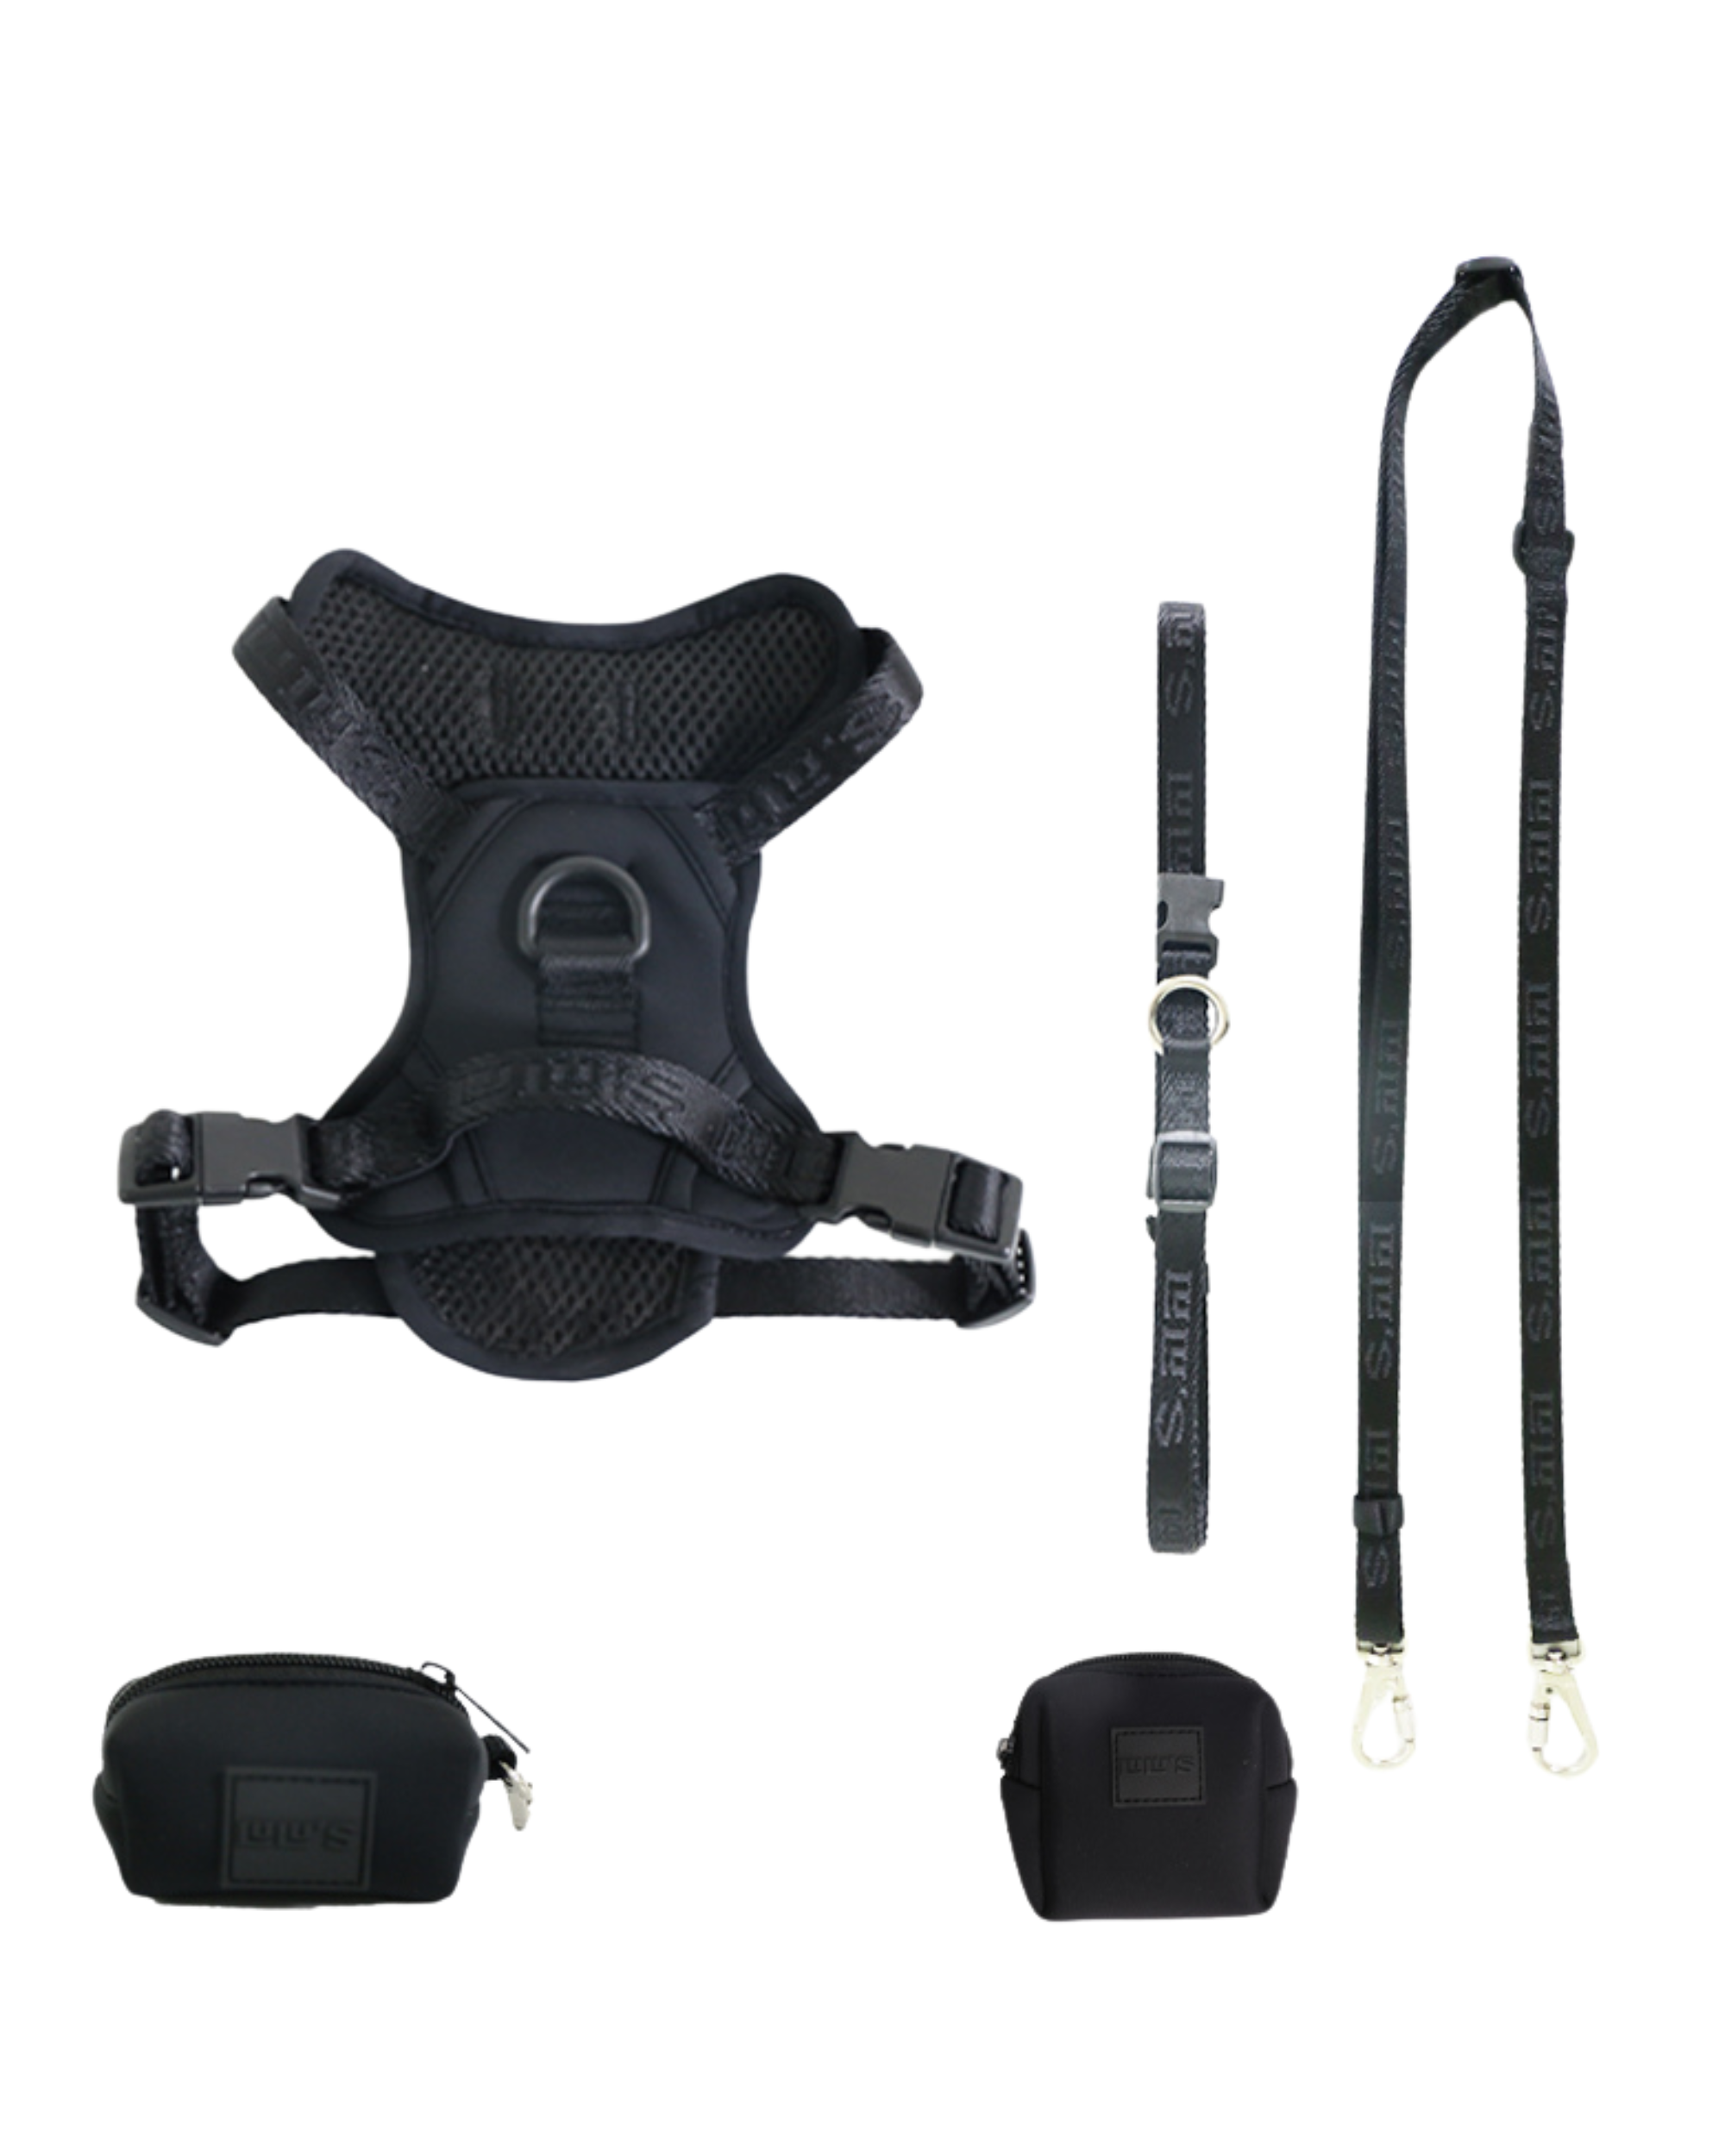 LULU's set in Midnight black, featuring a harness, a belt with an accessory pouch, a small poop bag holder, and a leash. The set highlights coordinated dog walking accessories designed for both style and practicality